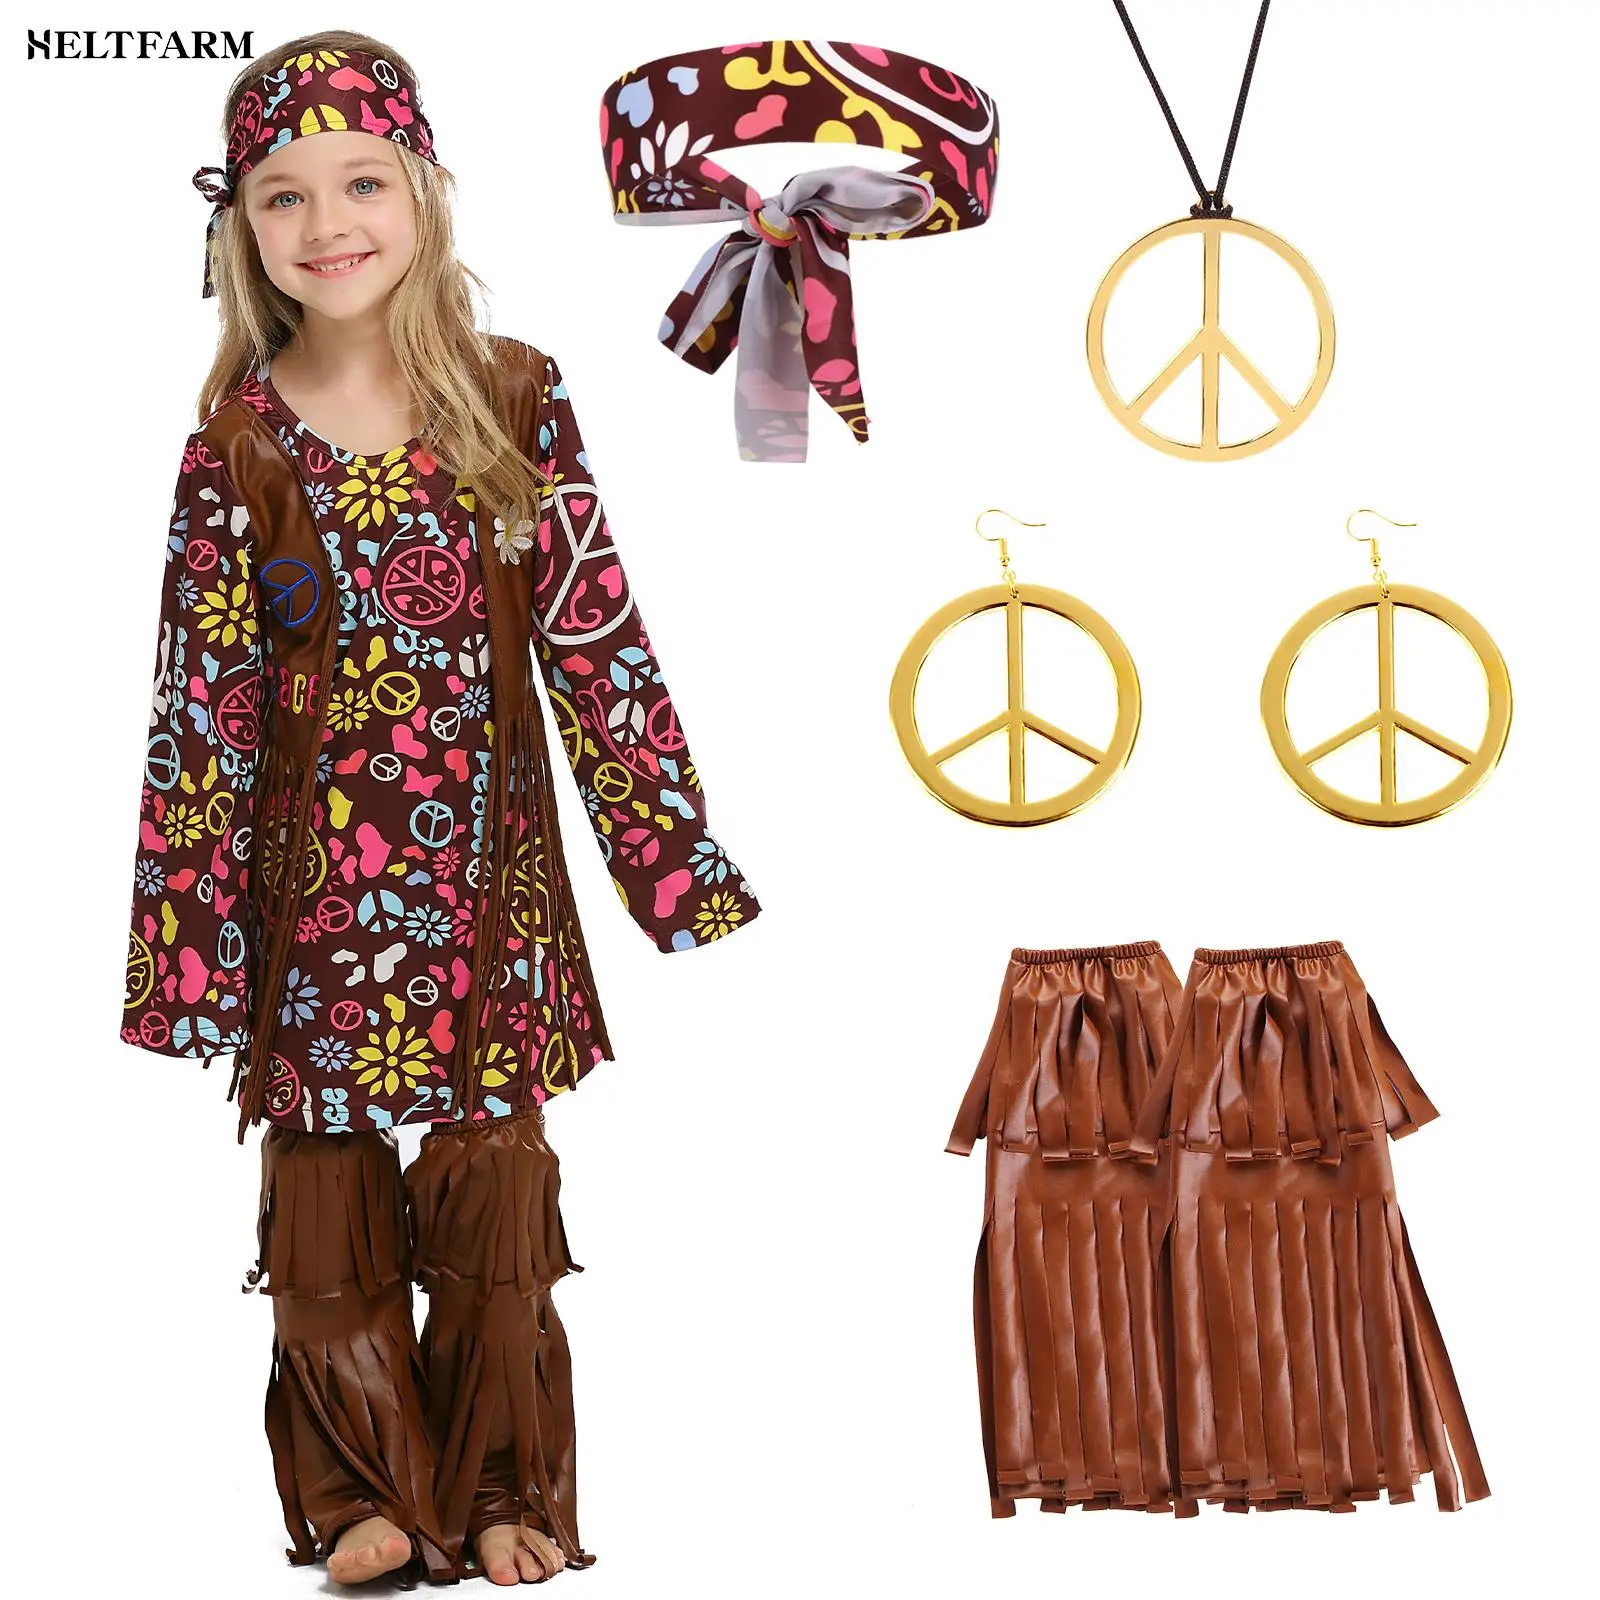 What Did Hippies Wear In The 70s | lupon.gov.ph